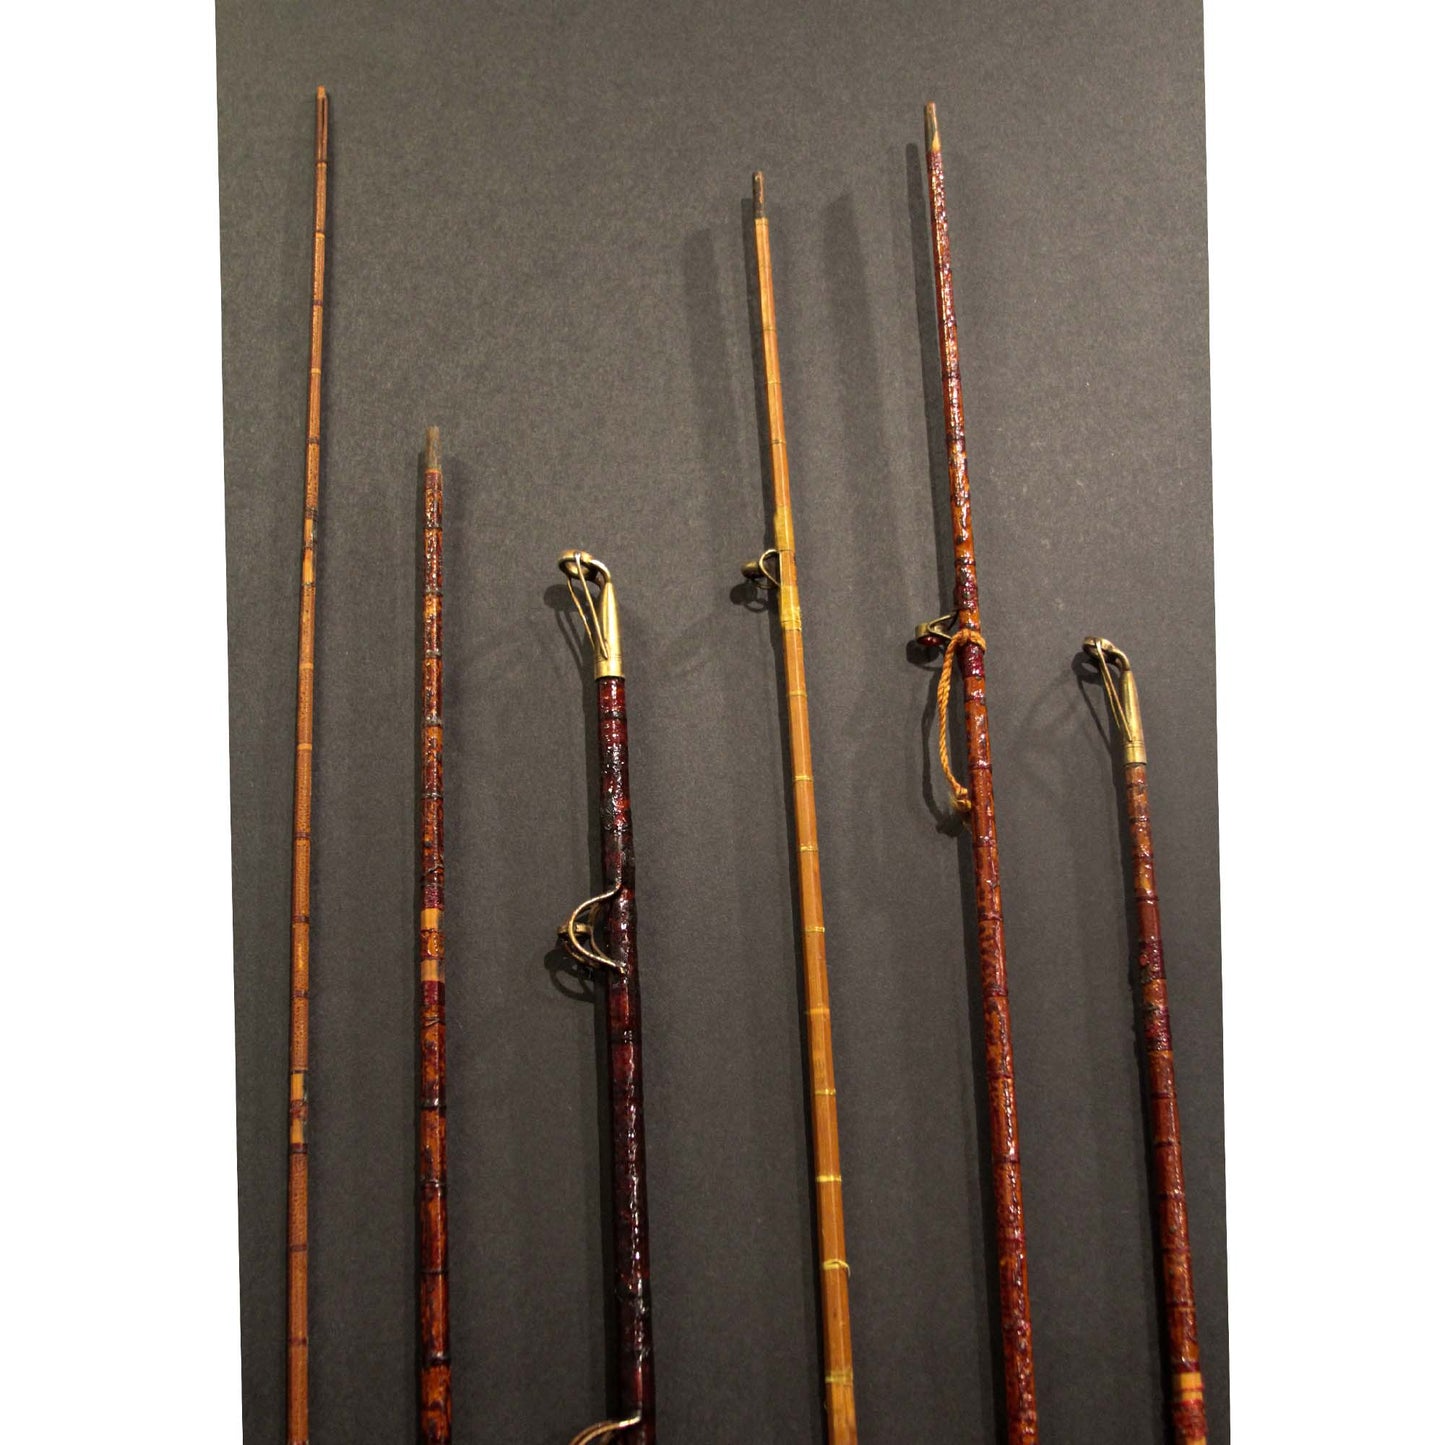 Antique Wood Fishing Pole Set of 6 Top Zoom